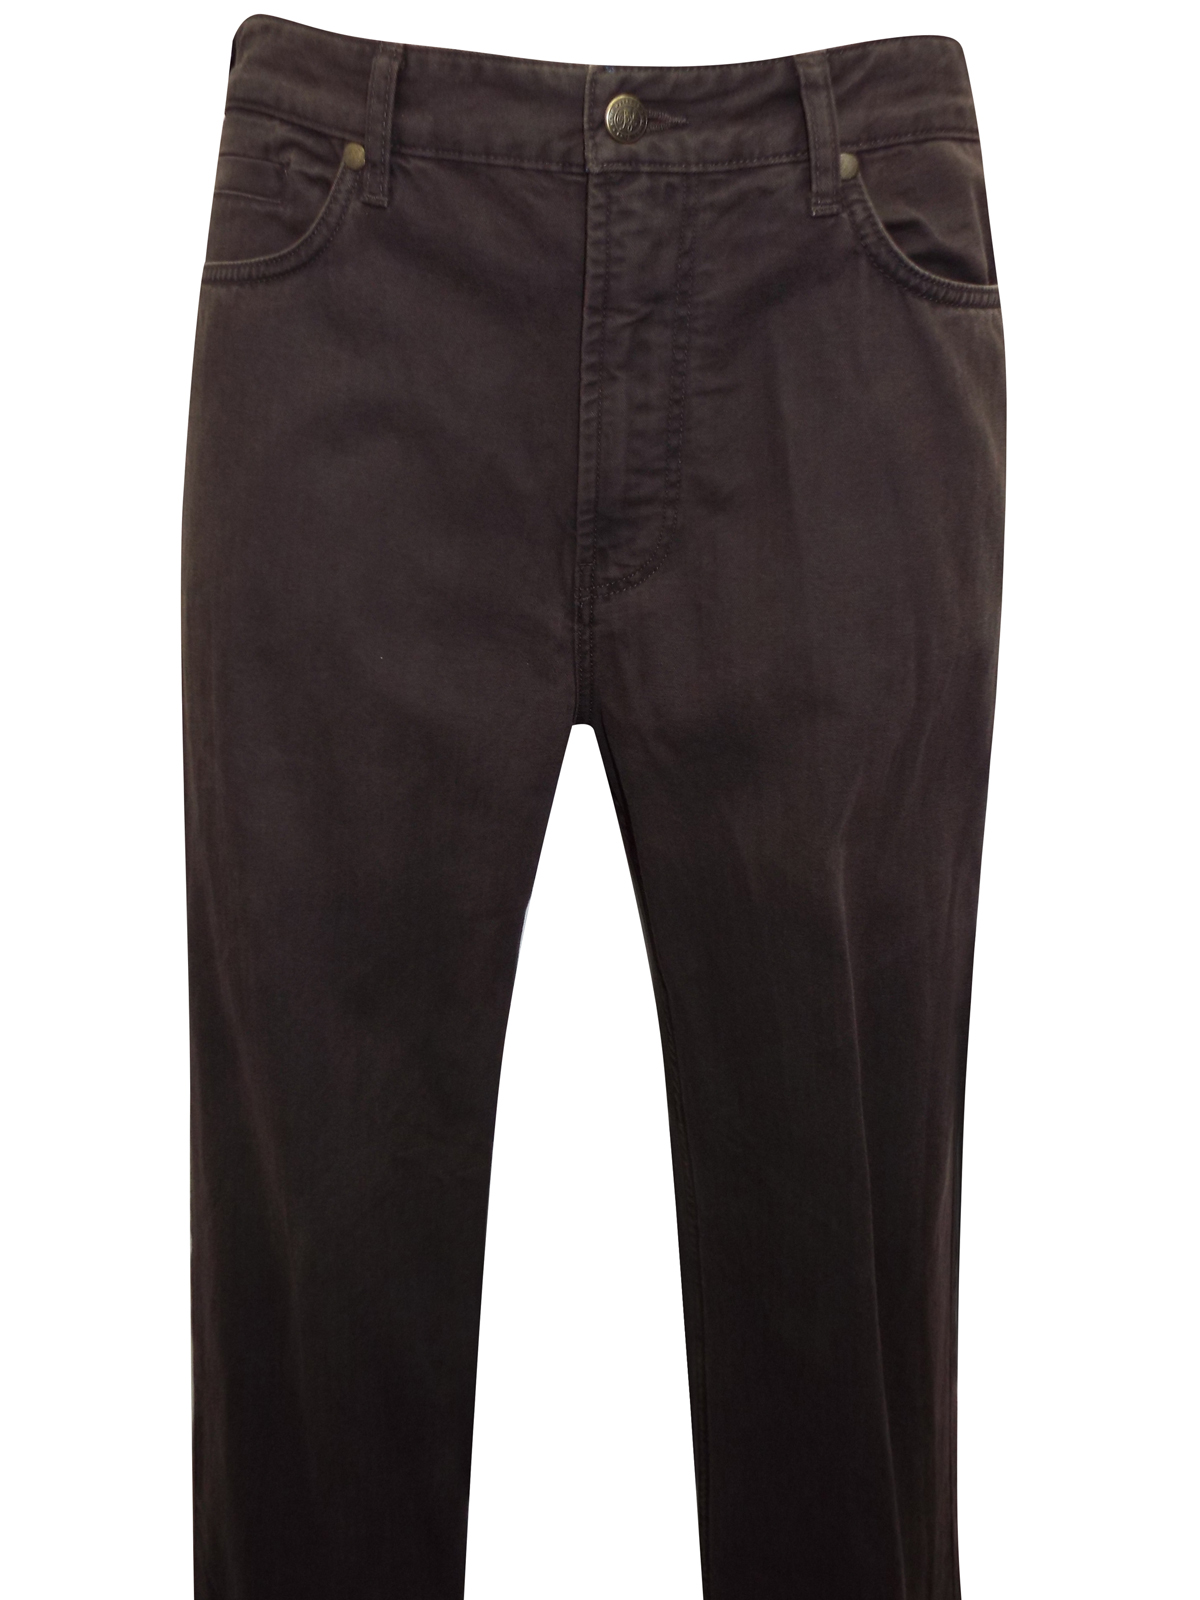 Marks and Spencer - - M&5 CHOCOLATE Cotton Rich Straight Leg Trousers ...